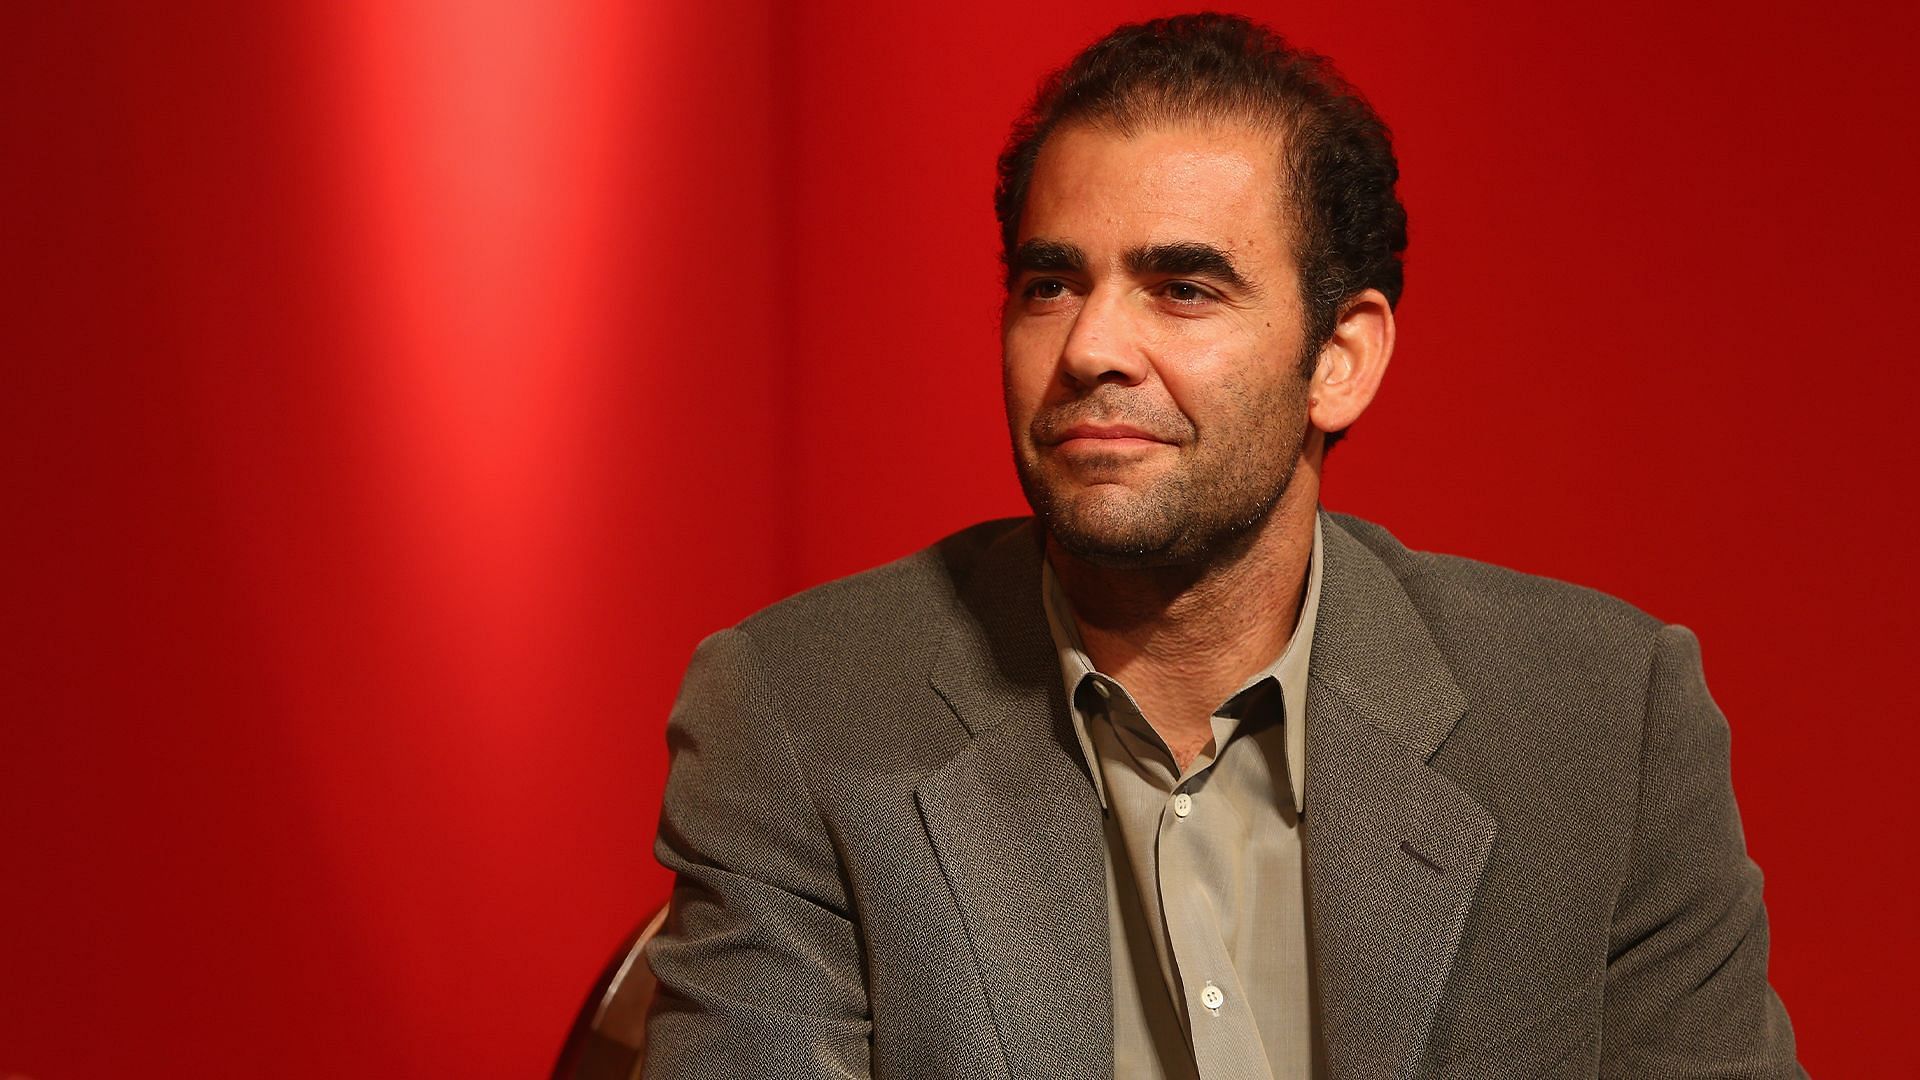 Pete Sampras played a crucial role in USA